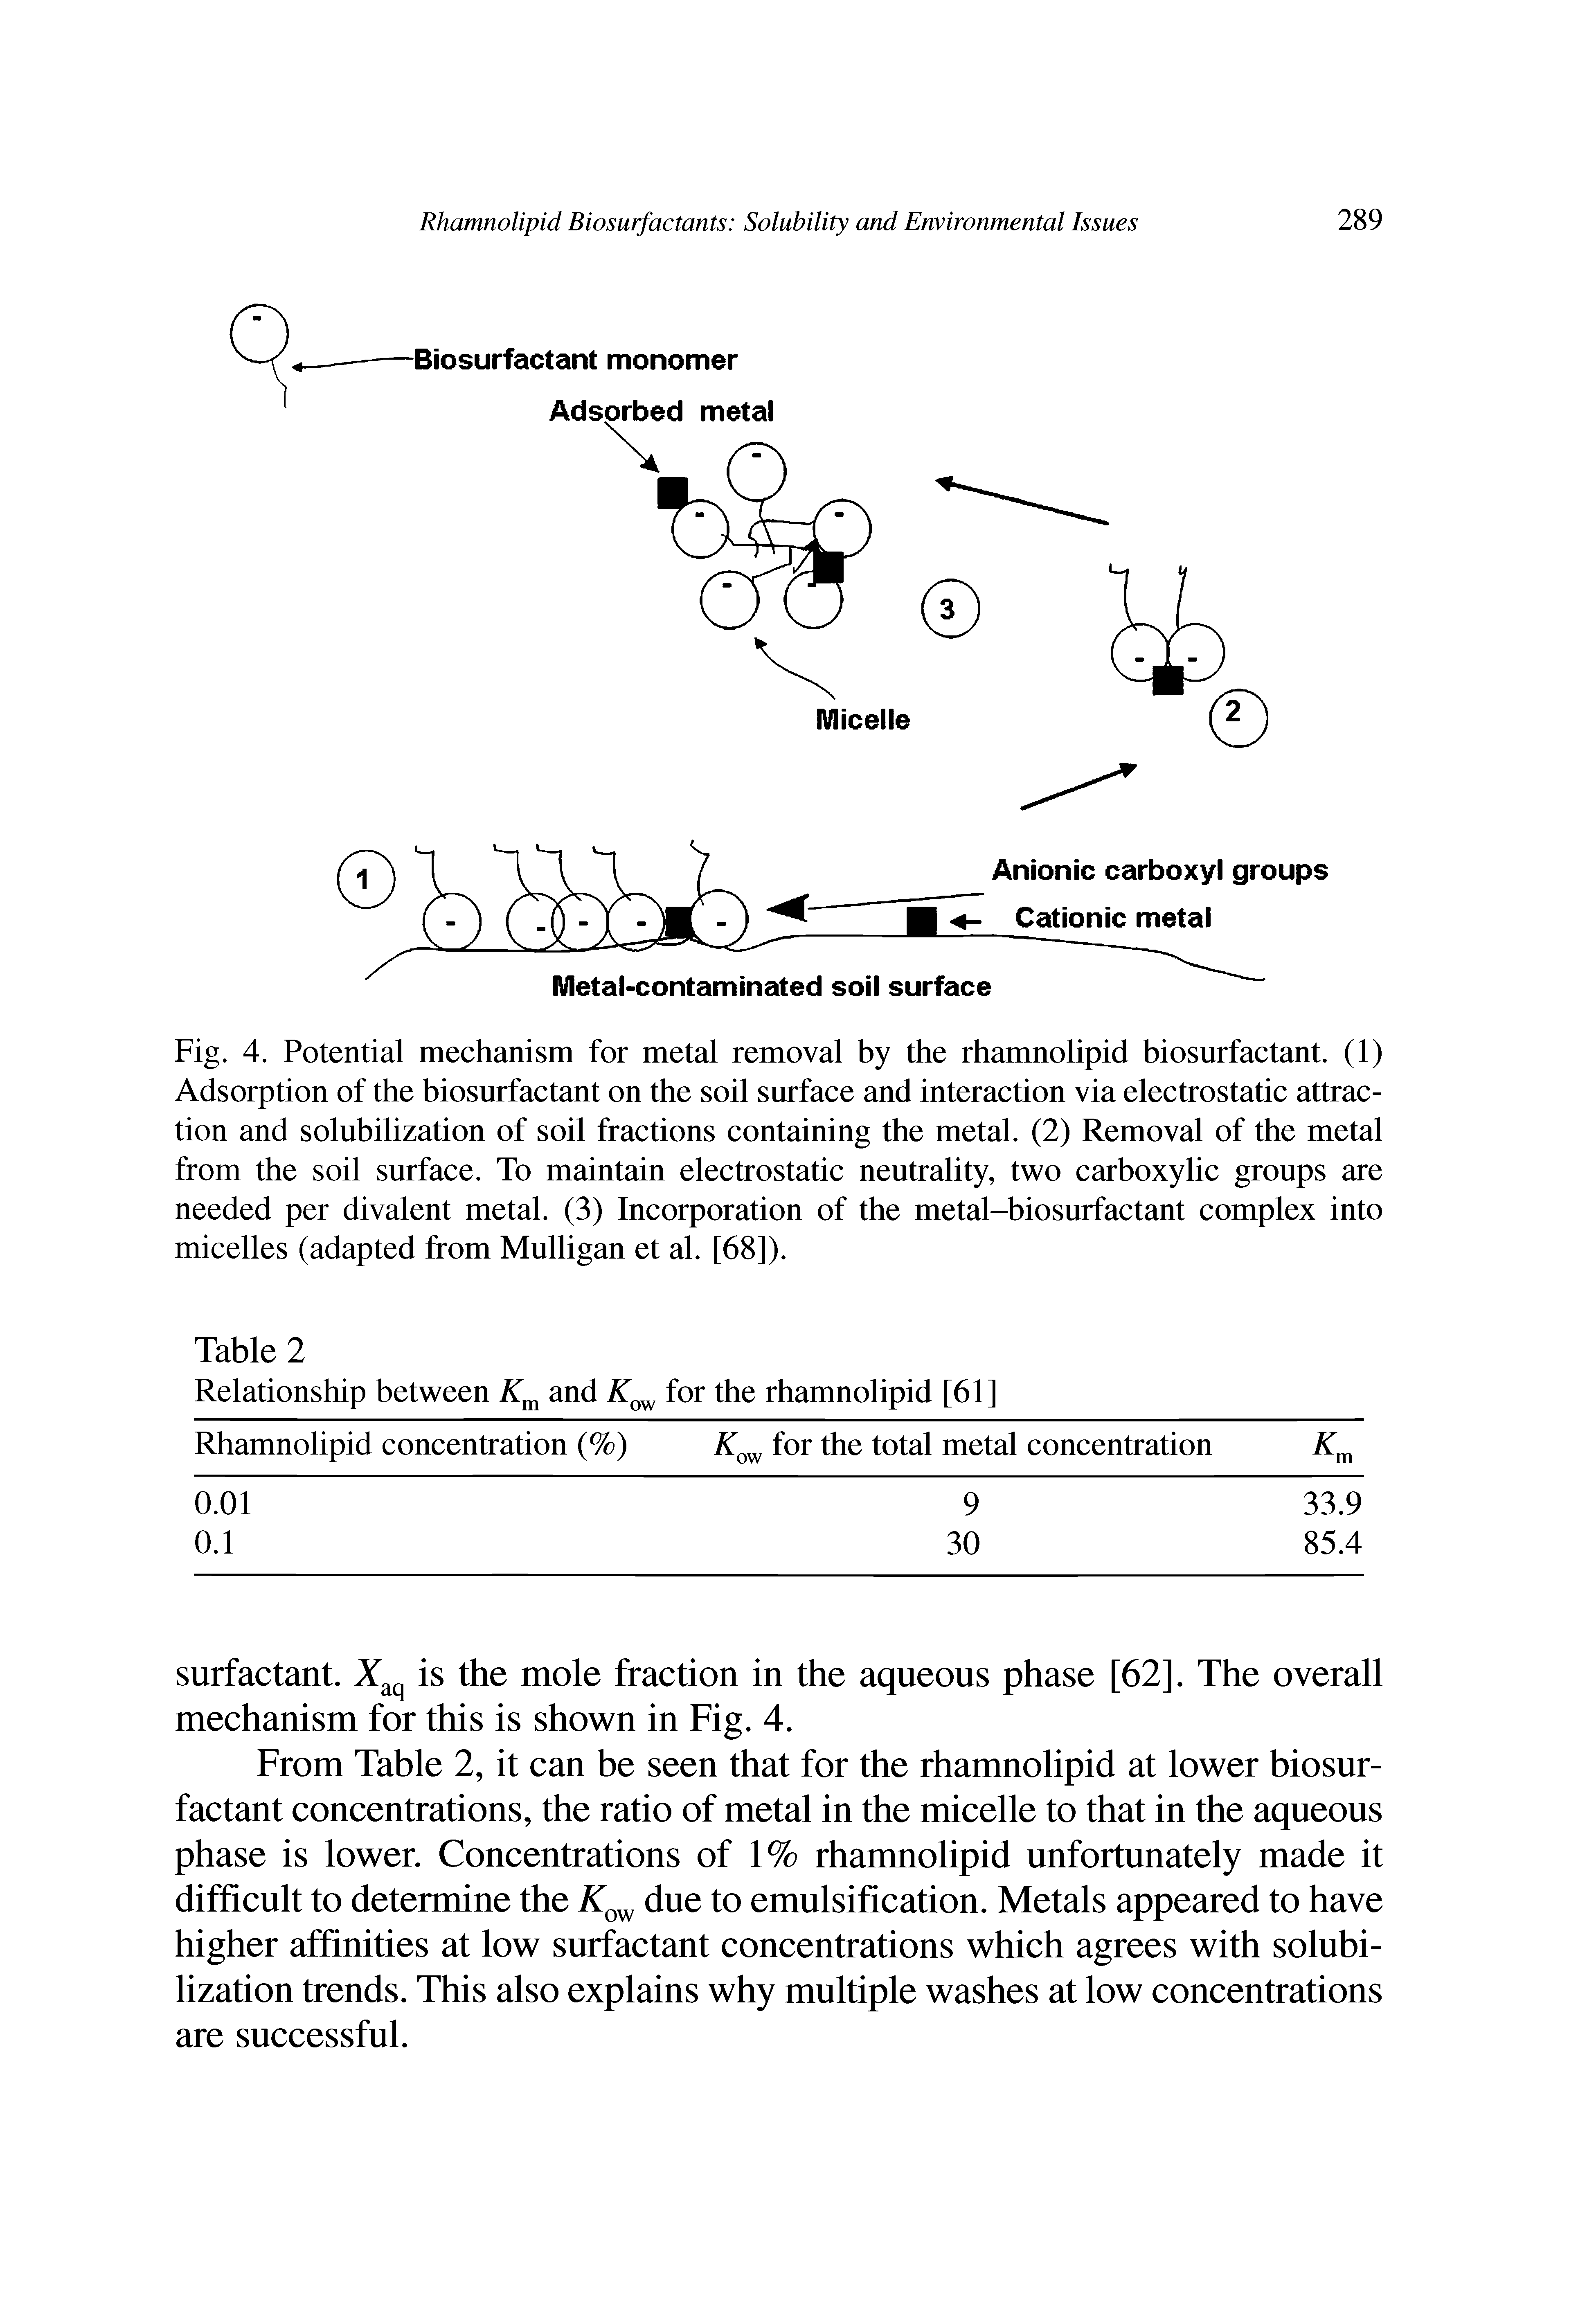 Fig. 4. Potential mechanism for metal removal by the rhamnolipid biosurfactant. (1) Adsorption of the biosurfactant on the soil surface and interaction via electrostatic attraction and solubilization of soil fractions containing the metal. (2) Removal of the metal from the soil surface. To maintain electrostatic neutrality, two carboxylic groups are needed per divalent metal. (3) Incorporation of the metal-biosurfactant complex into micelles (adapted from Mulligan et al. [68]).